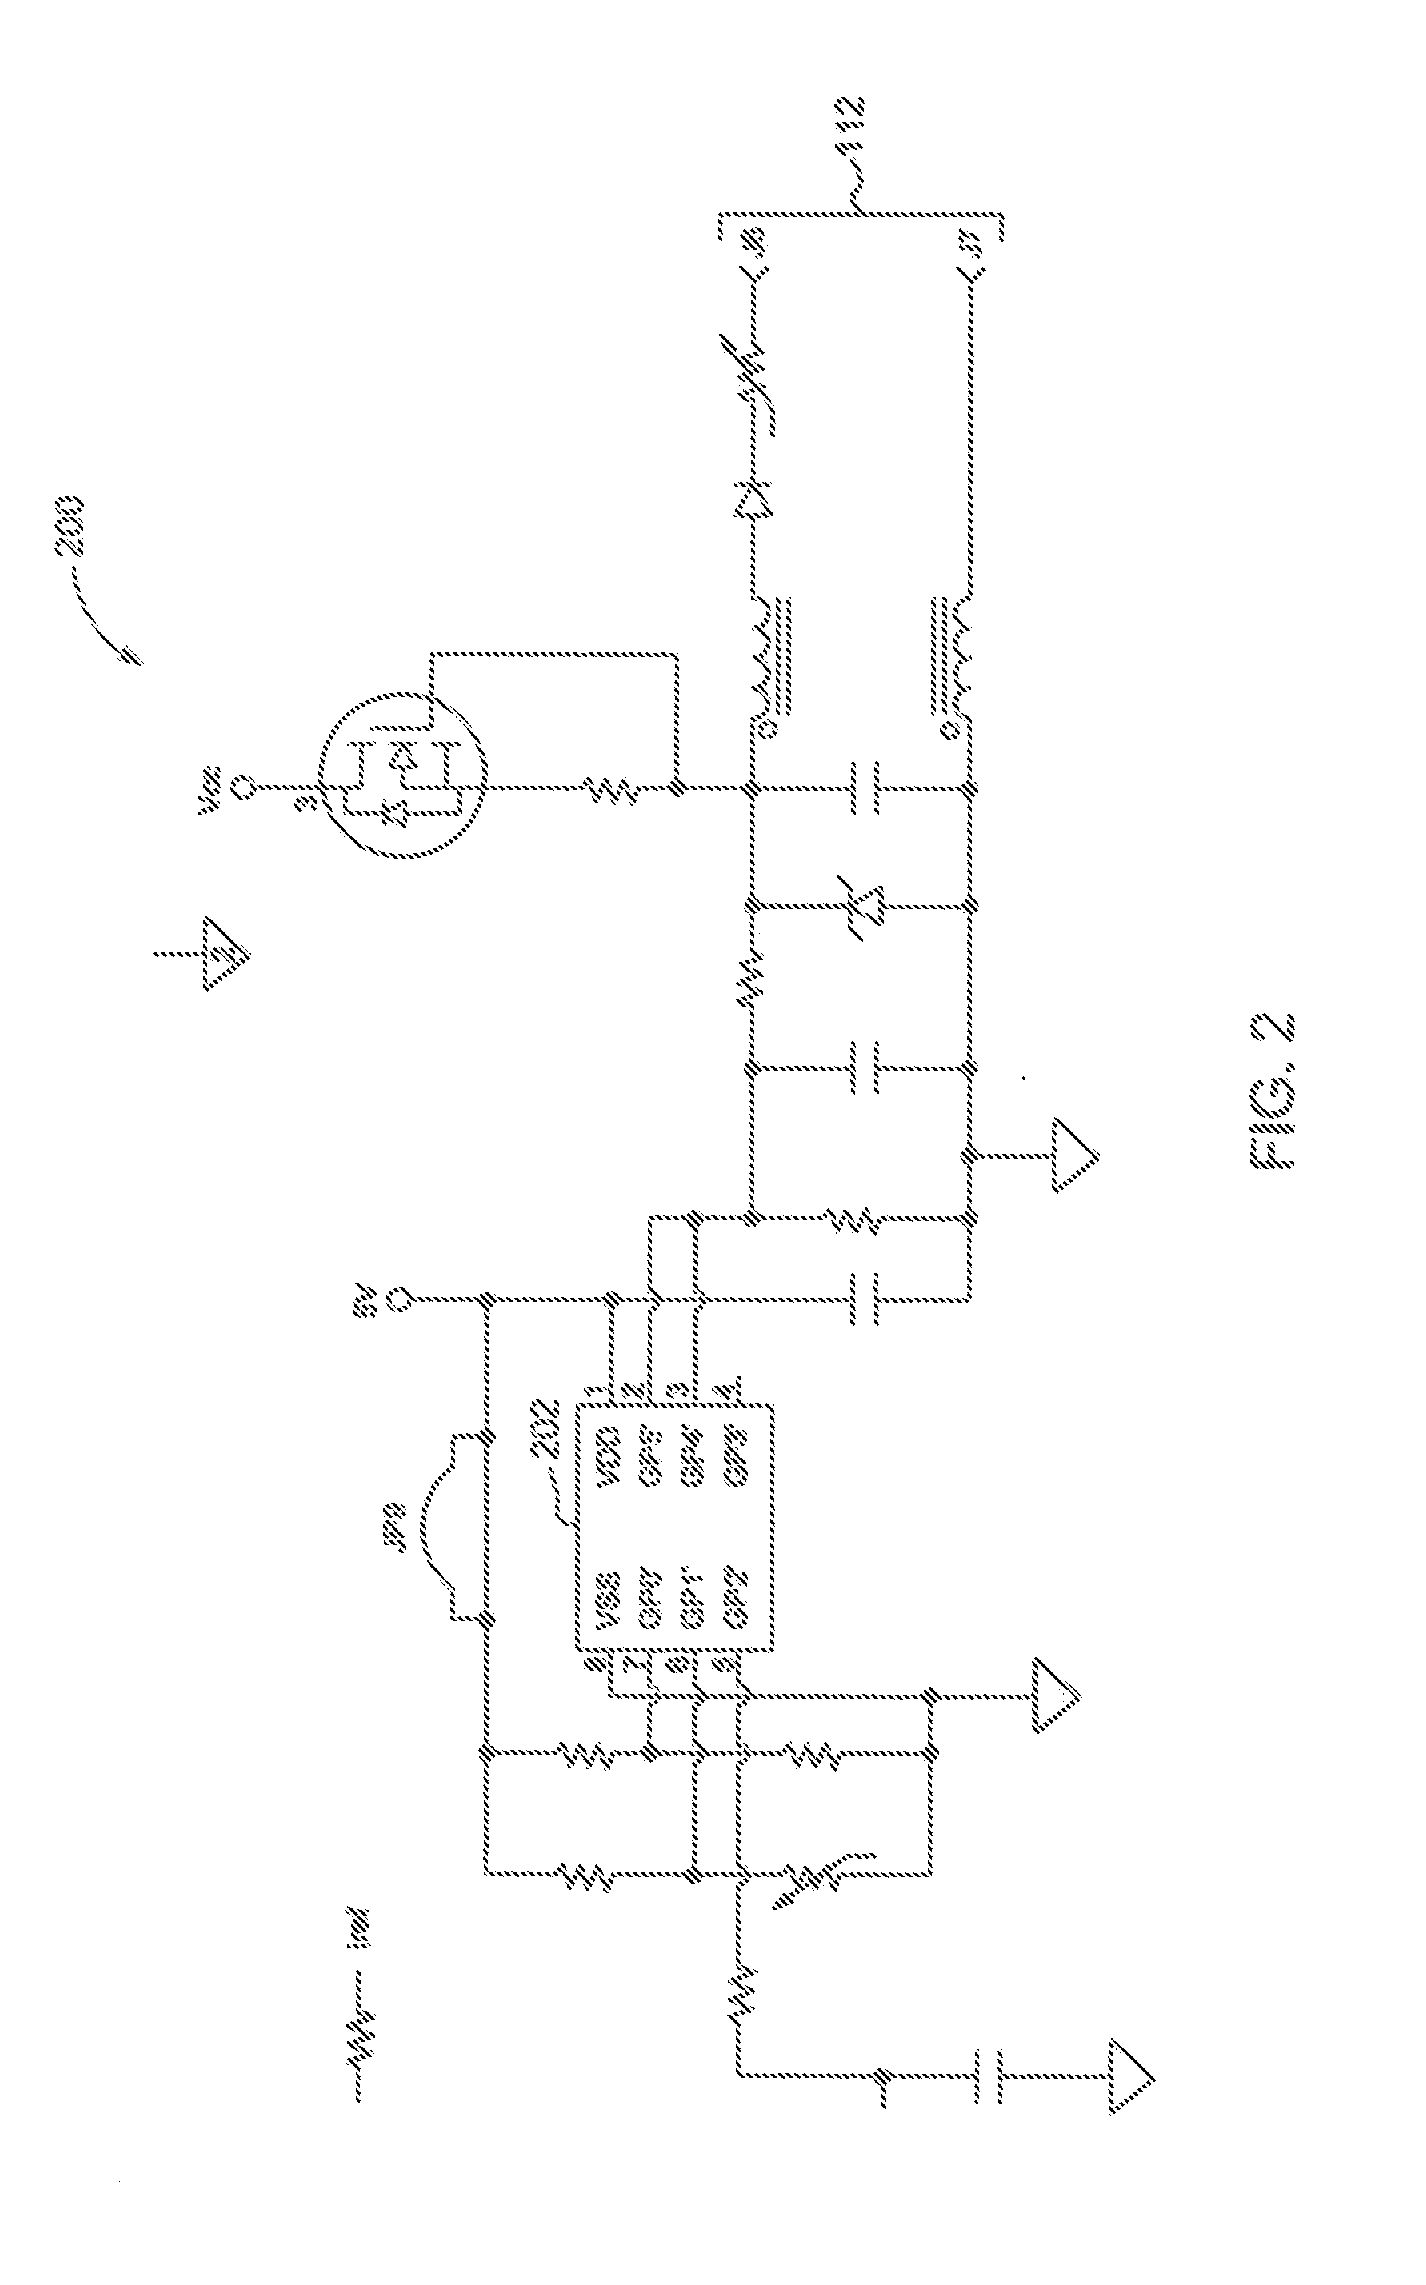 Digital control method for low output dimming of light emitting diode (LED) drivers